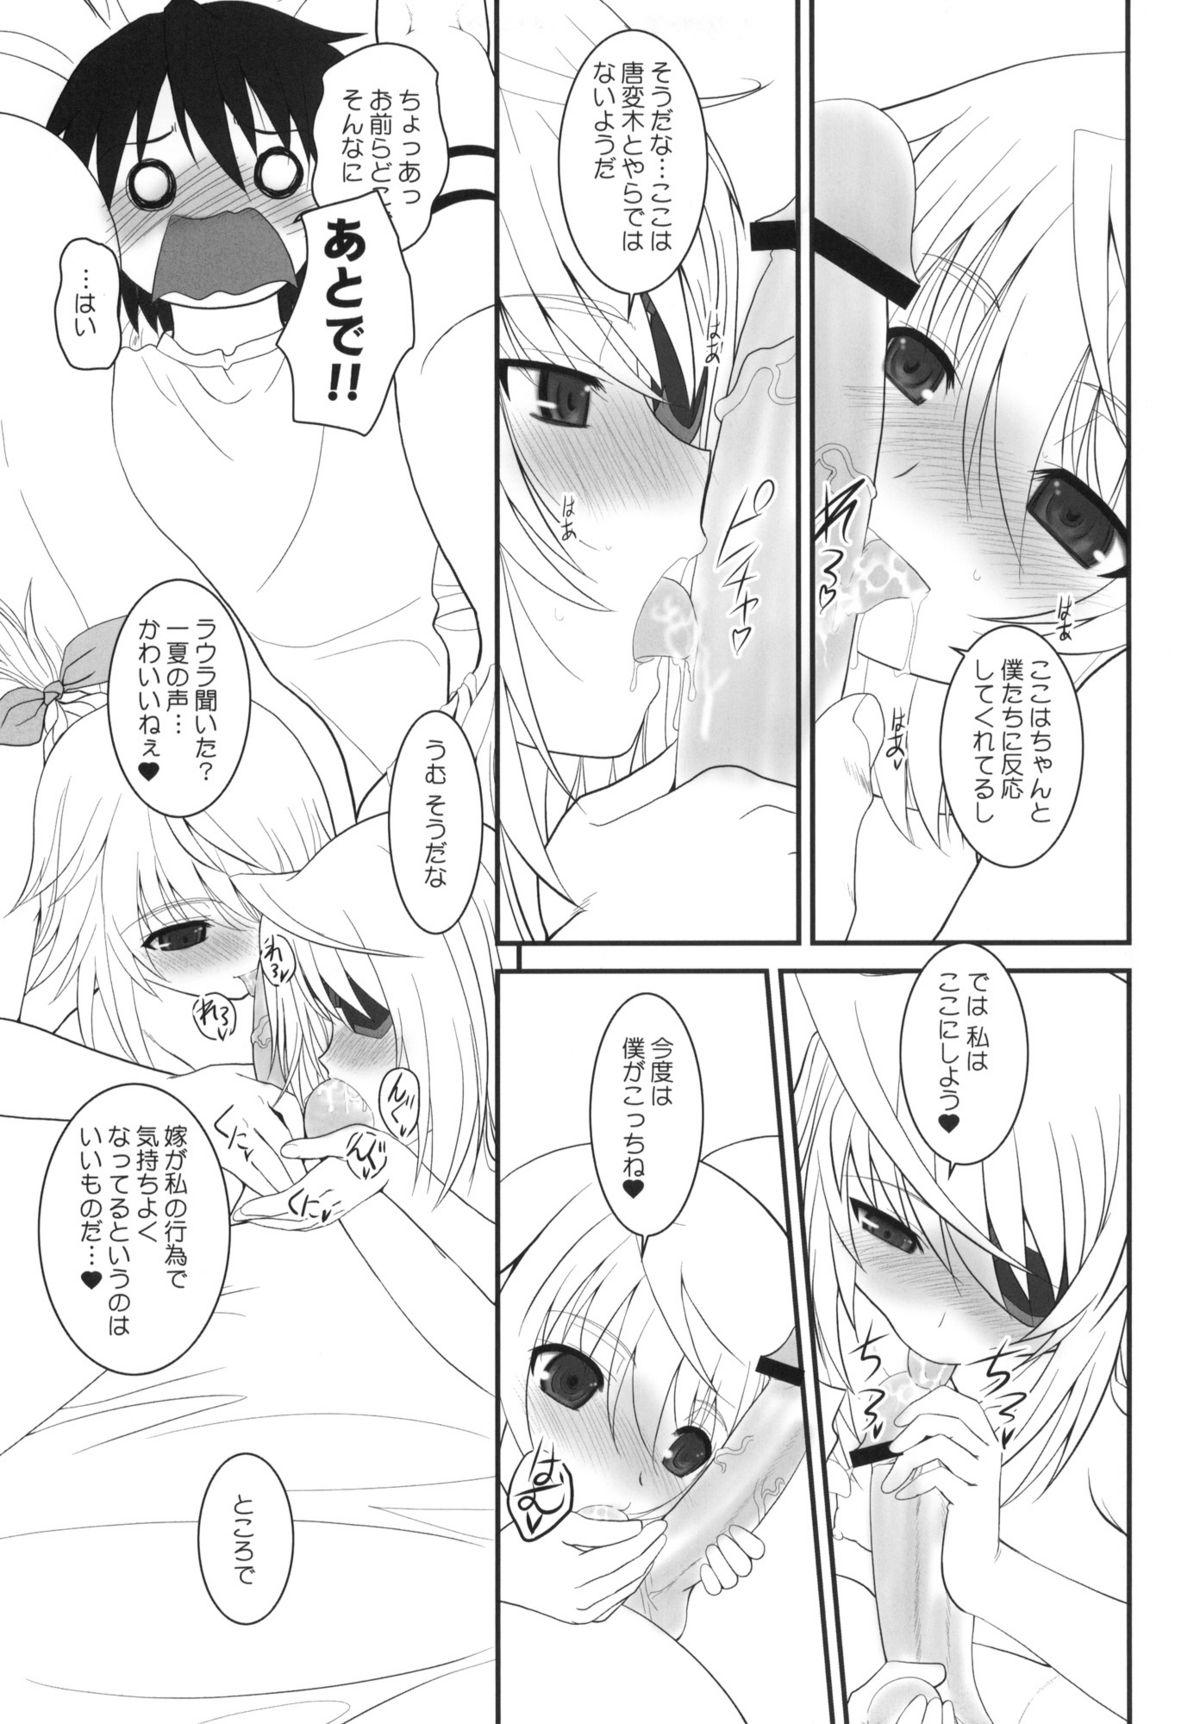 Dirty IS-LAND - Infinite stratos Panocha - Page 4